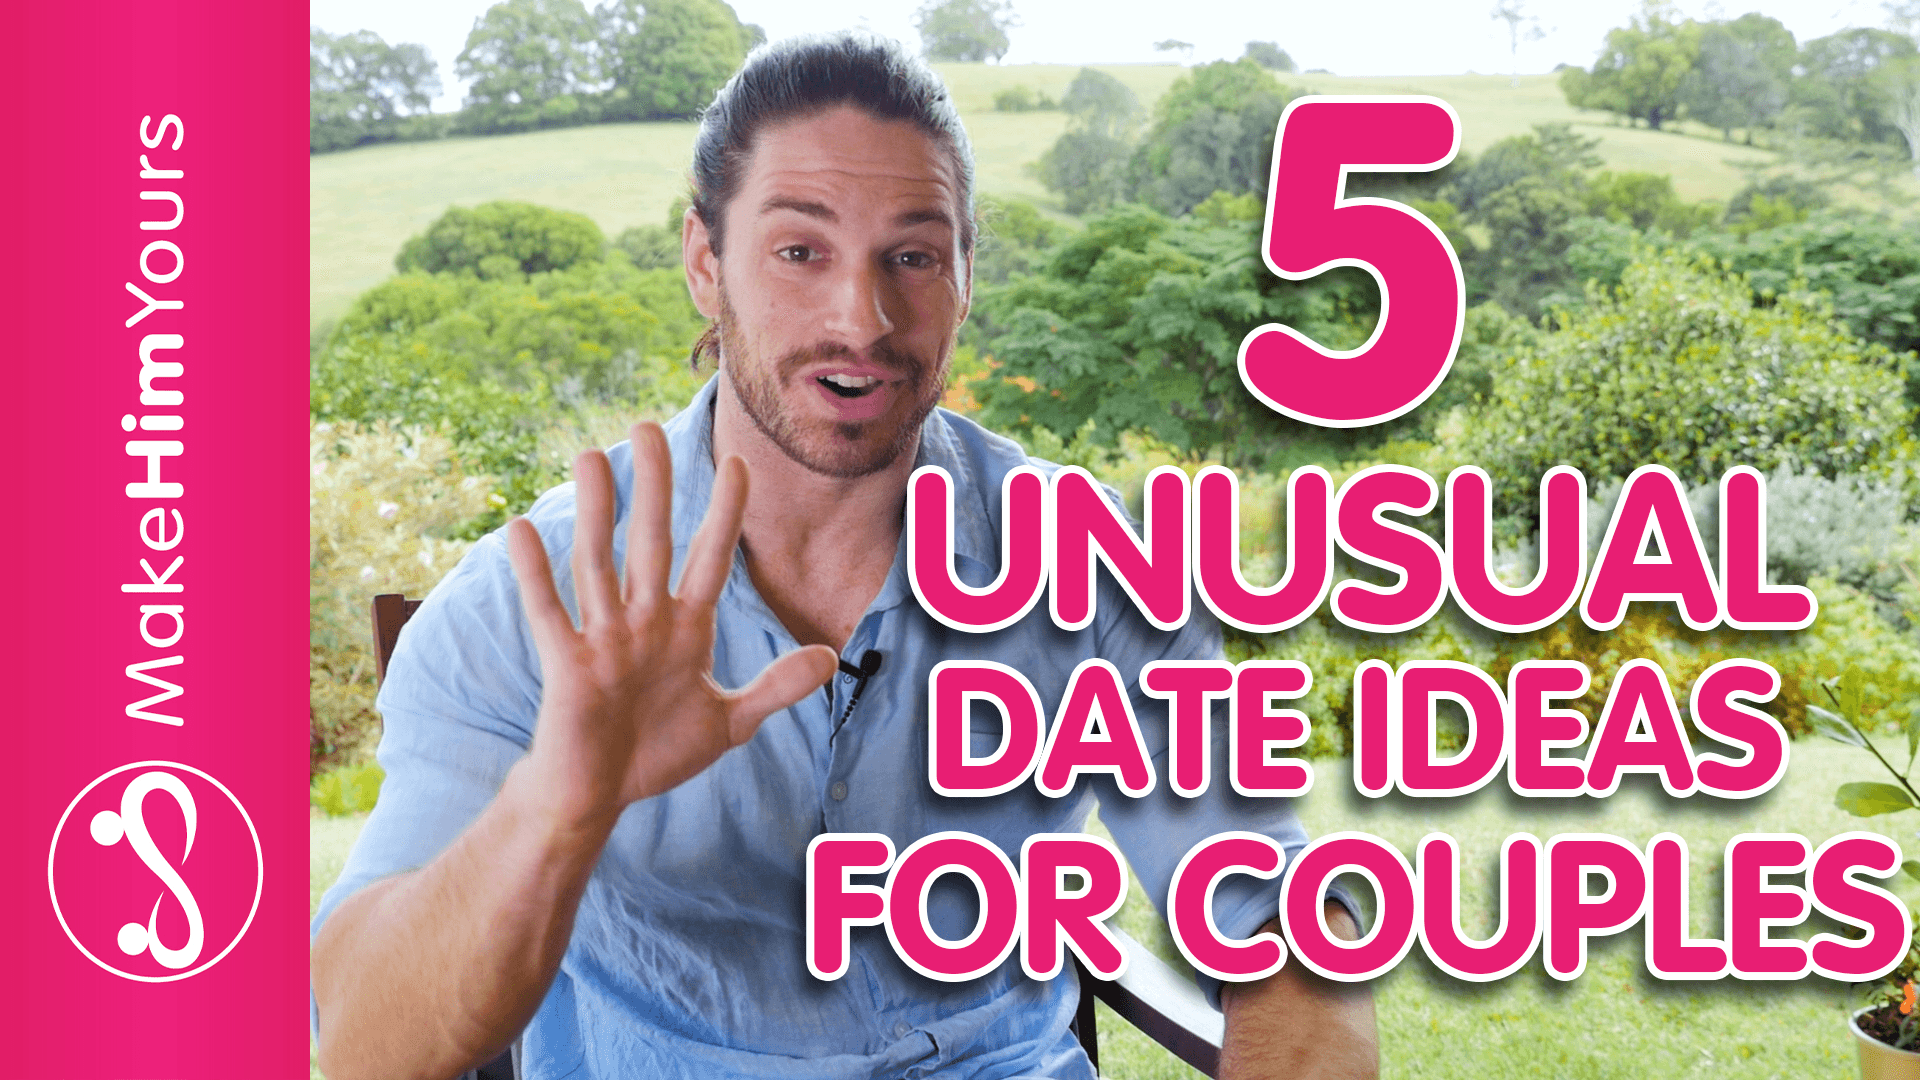 5 Unusual Date Ideas For Couples